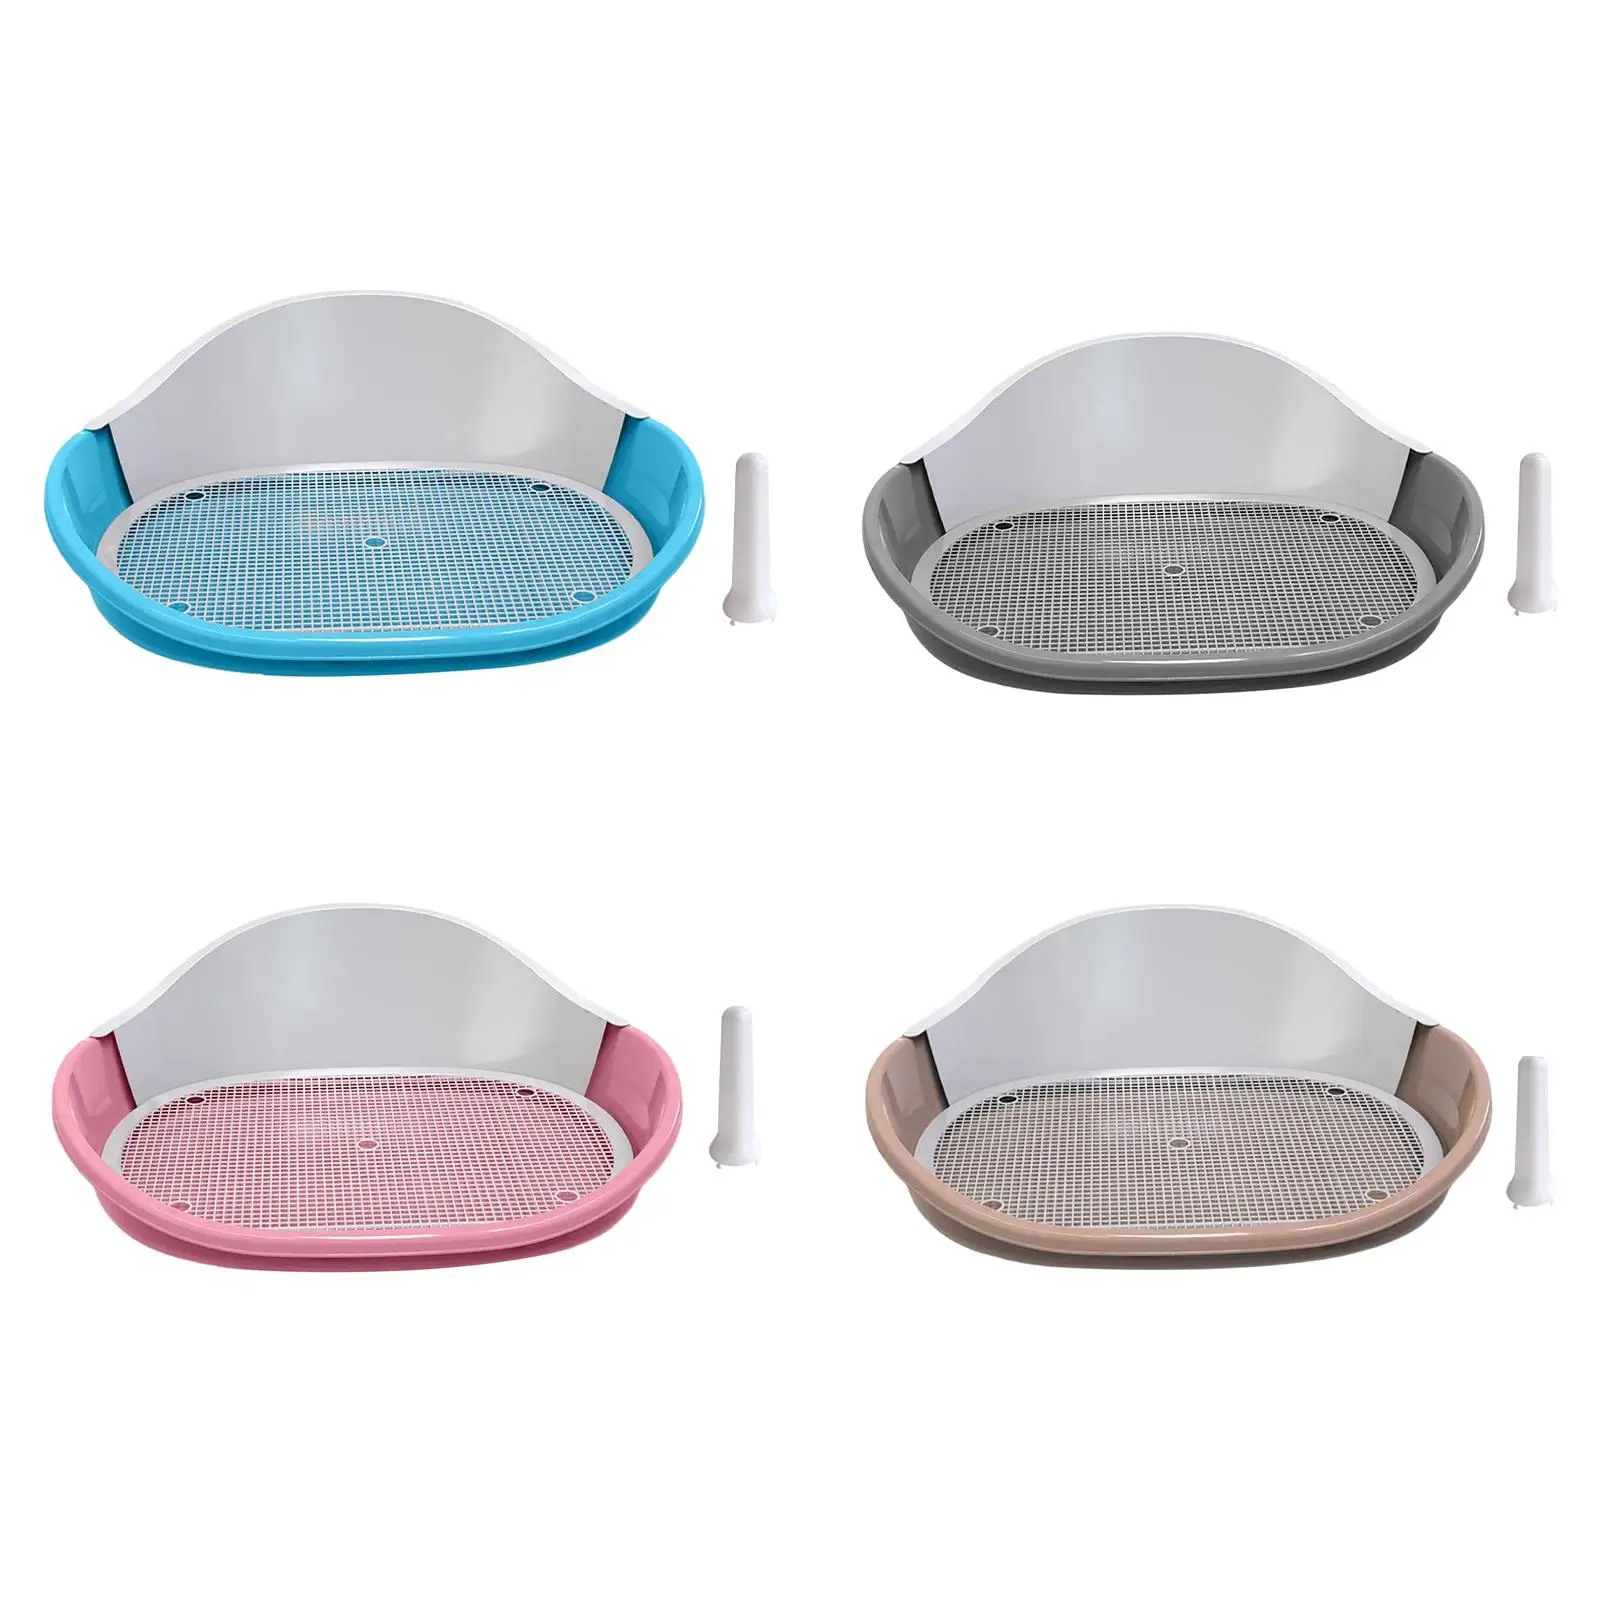 Indoor Dog Toilet Puppy Toilet Dog Litter Tray Puppy Pee Tray Washable Pet Training Toilet Tray for Cats Bunny Accessories